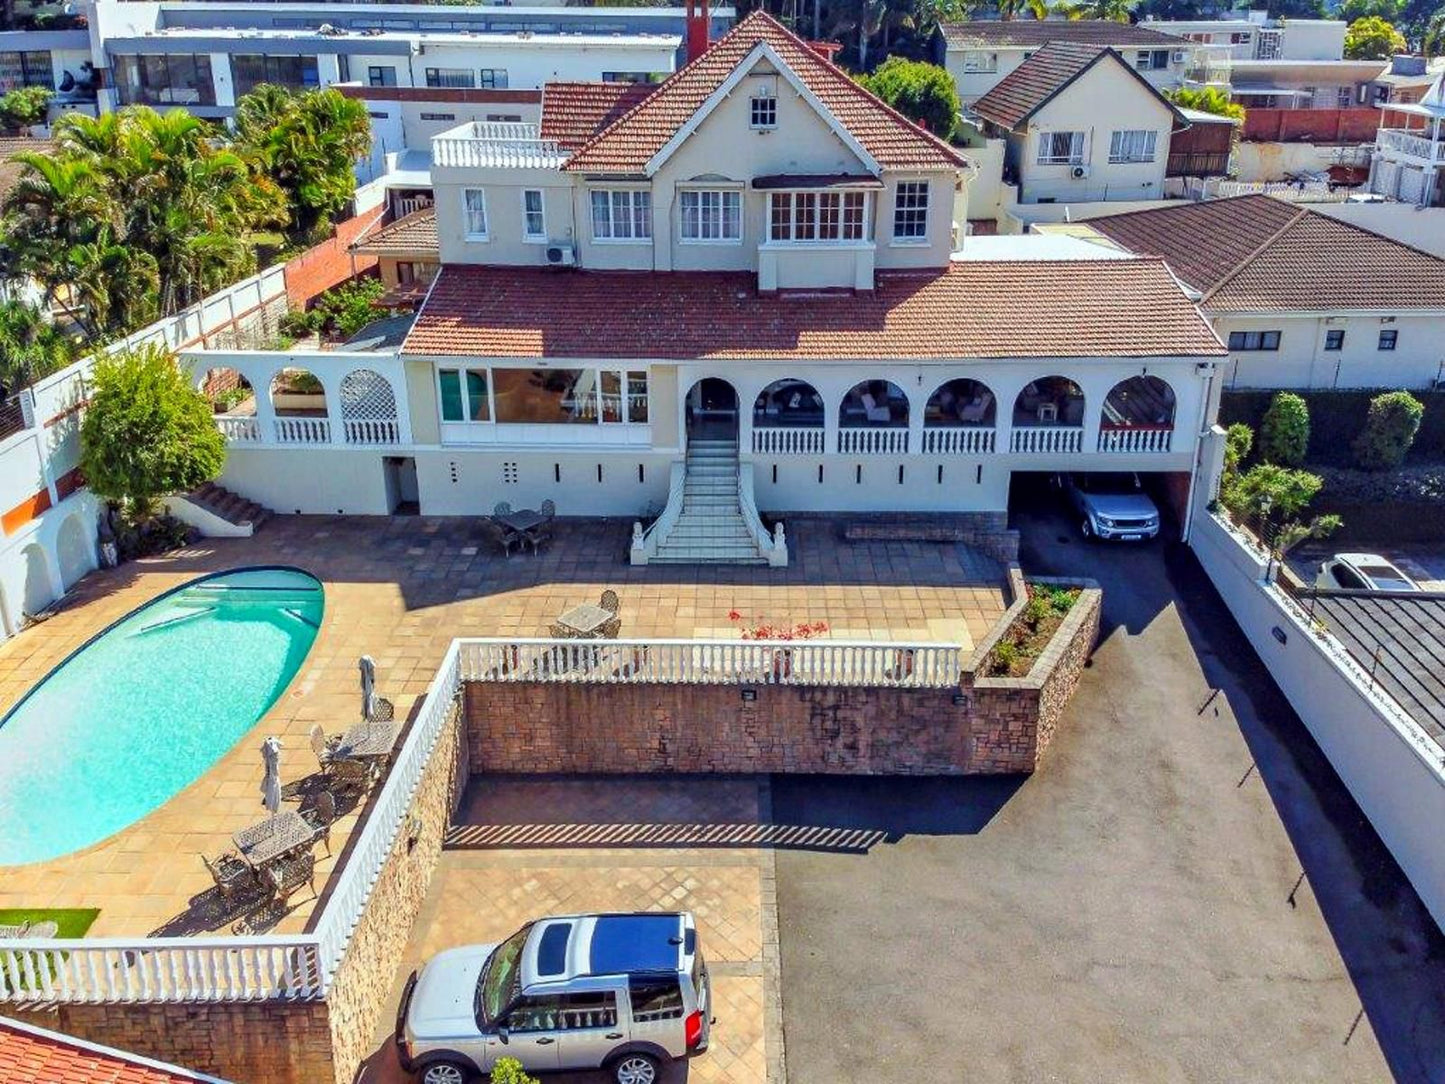 Albion Manor Morningside Durban Kwazulu Natal South Africa Balcony, Architecture, House, Building, Swimming Pool, Car, Vehicle